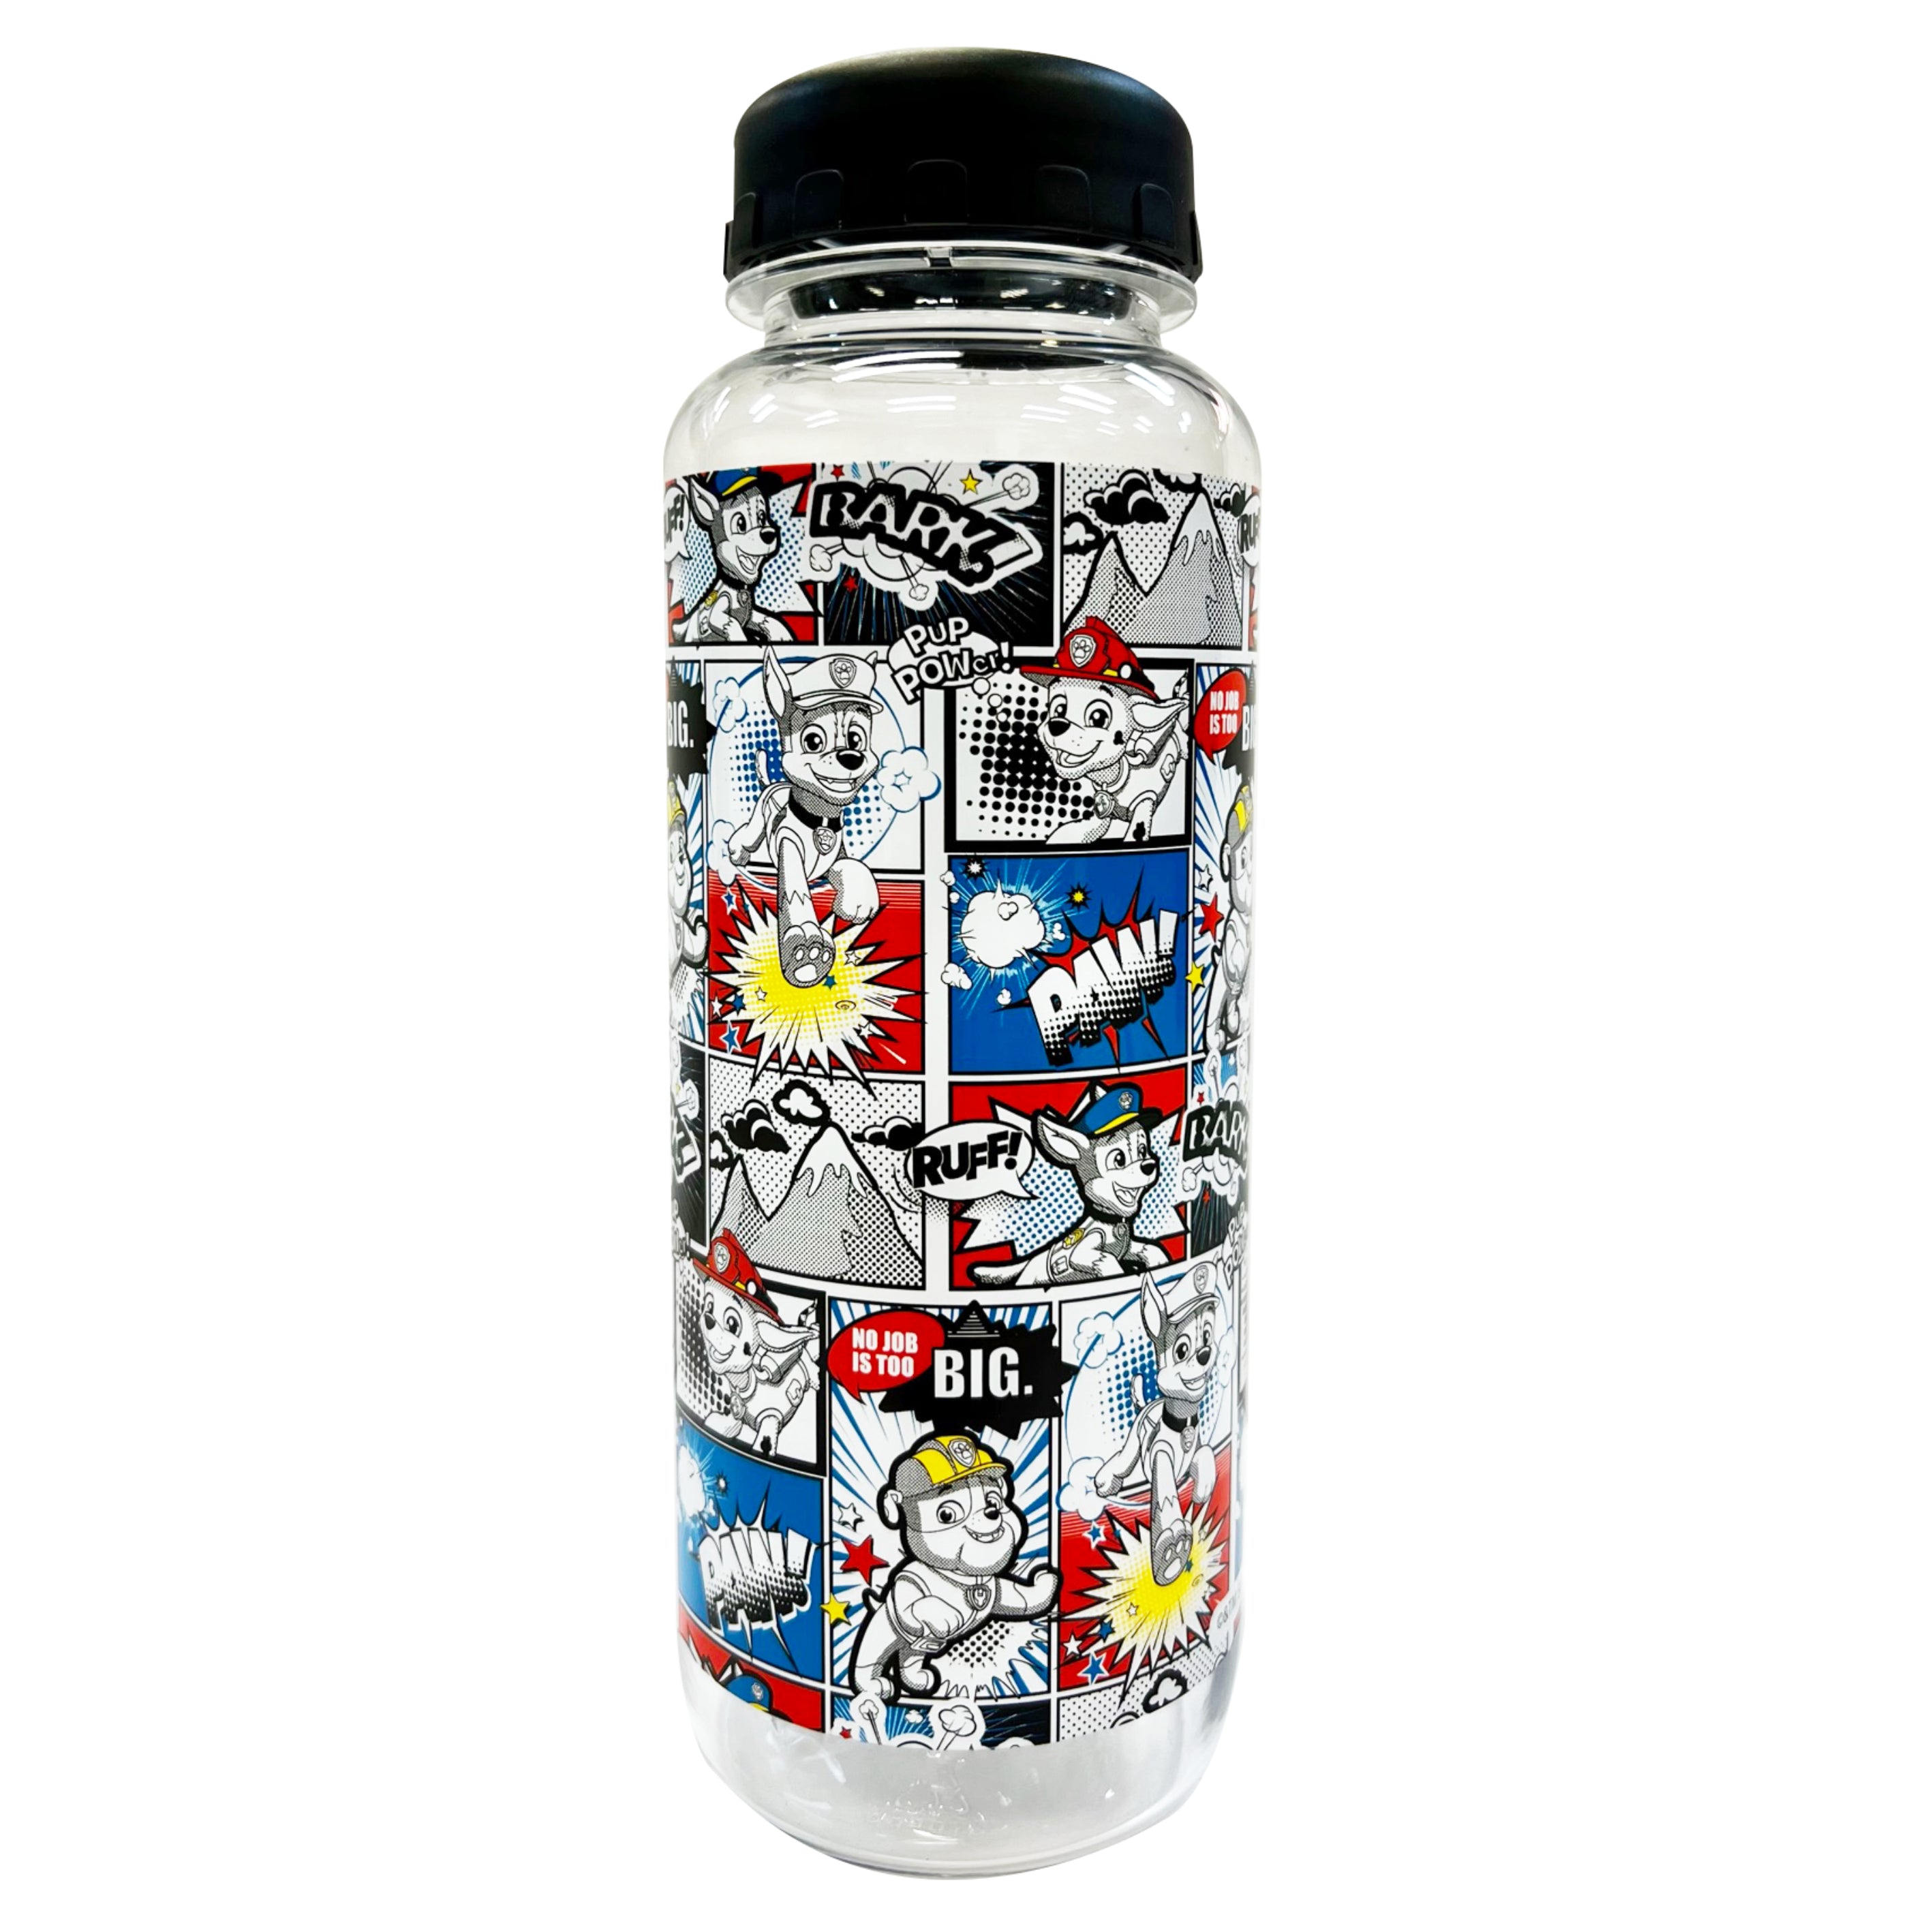 PAW PATROL Water Bottle with Lid 750ML - _MS, ECTL-2NDPCS50, ECTL-AUG23, FABER-CASTELL, PAW PATROL